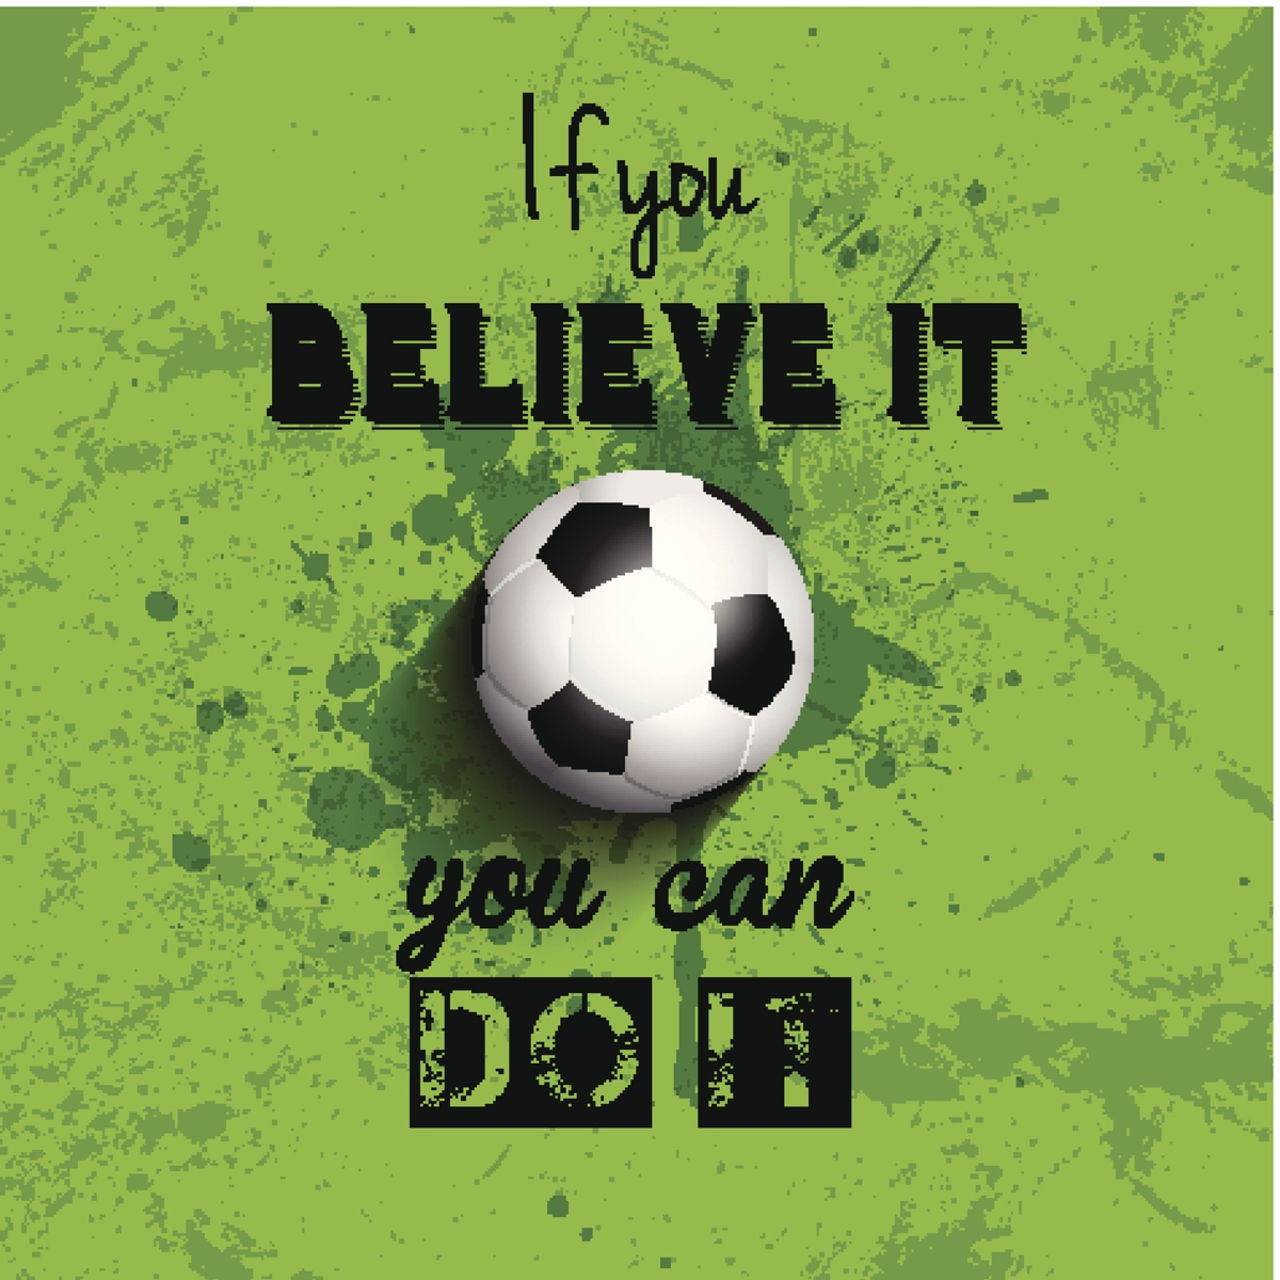 Soccer Motivational Quotes
 The Best Sports Motivational Quotes to Take Inspiration